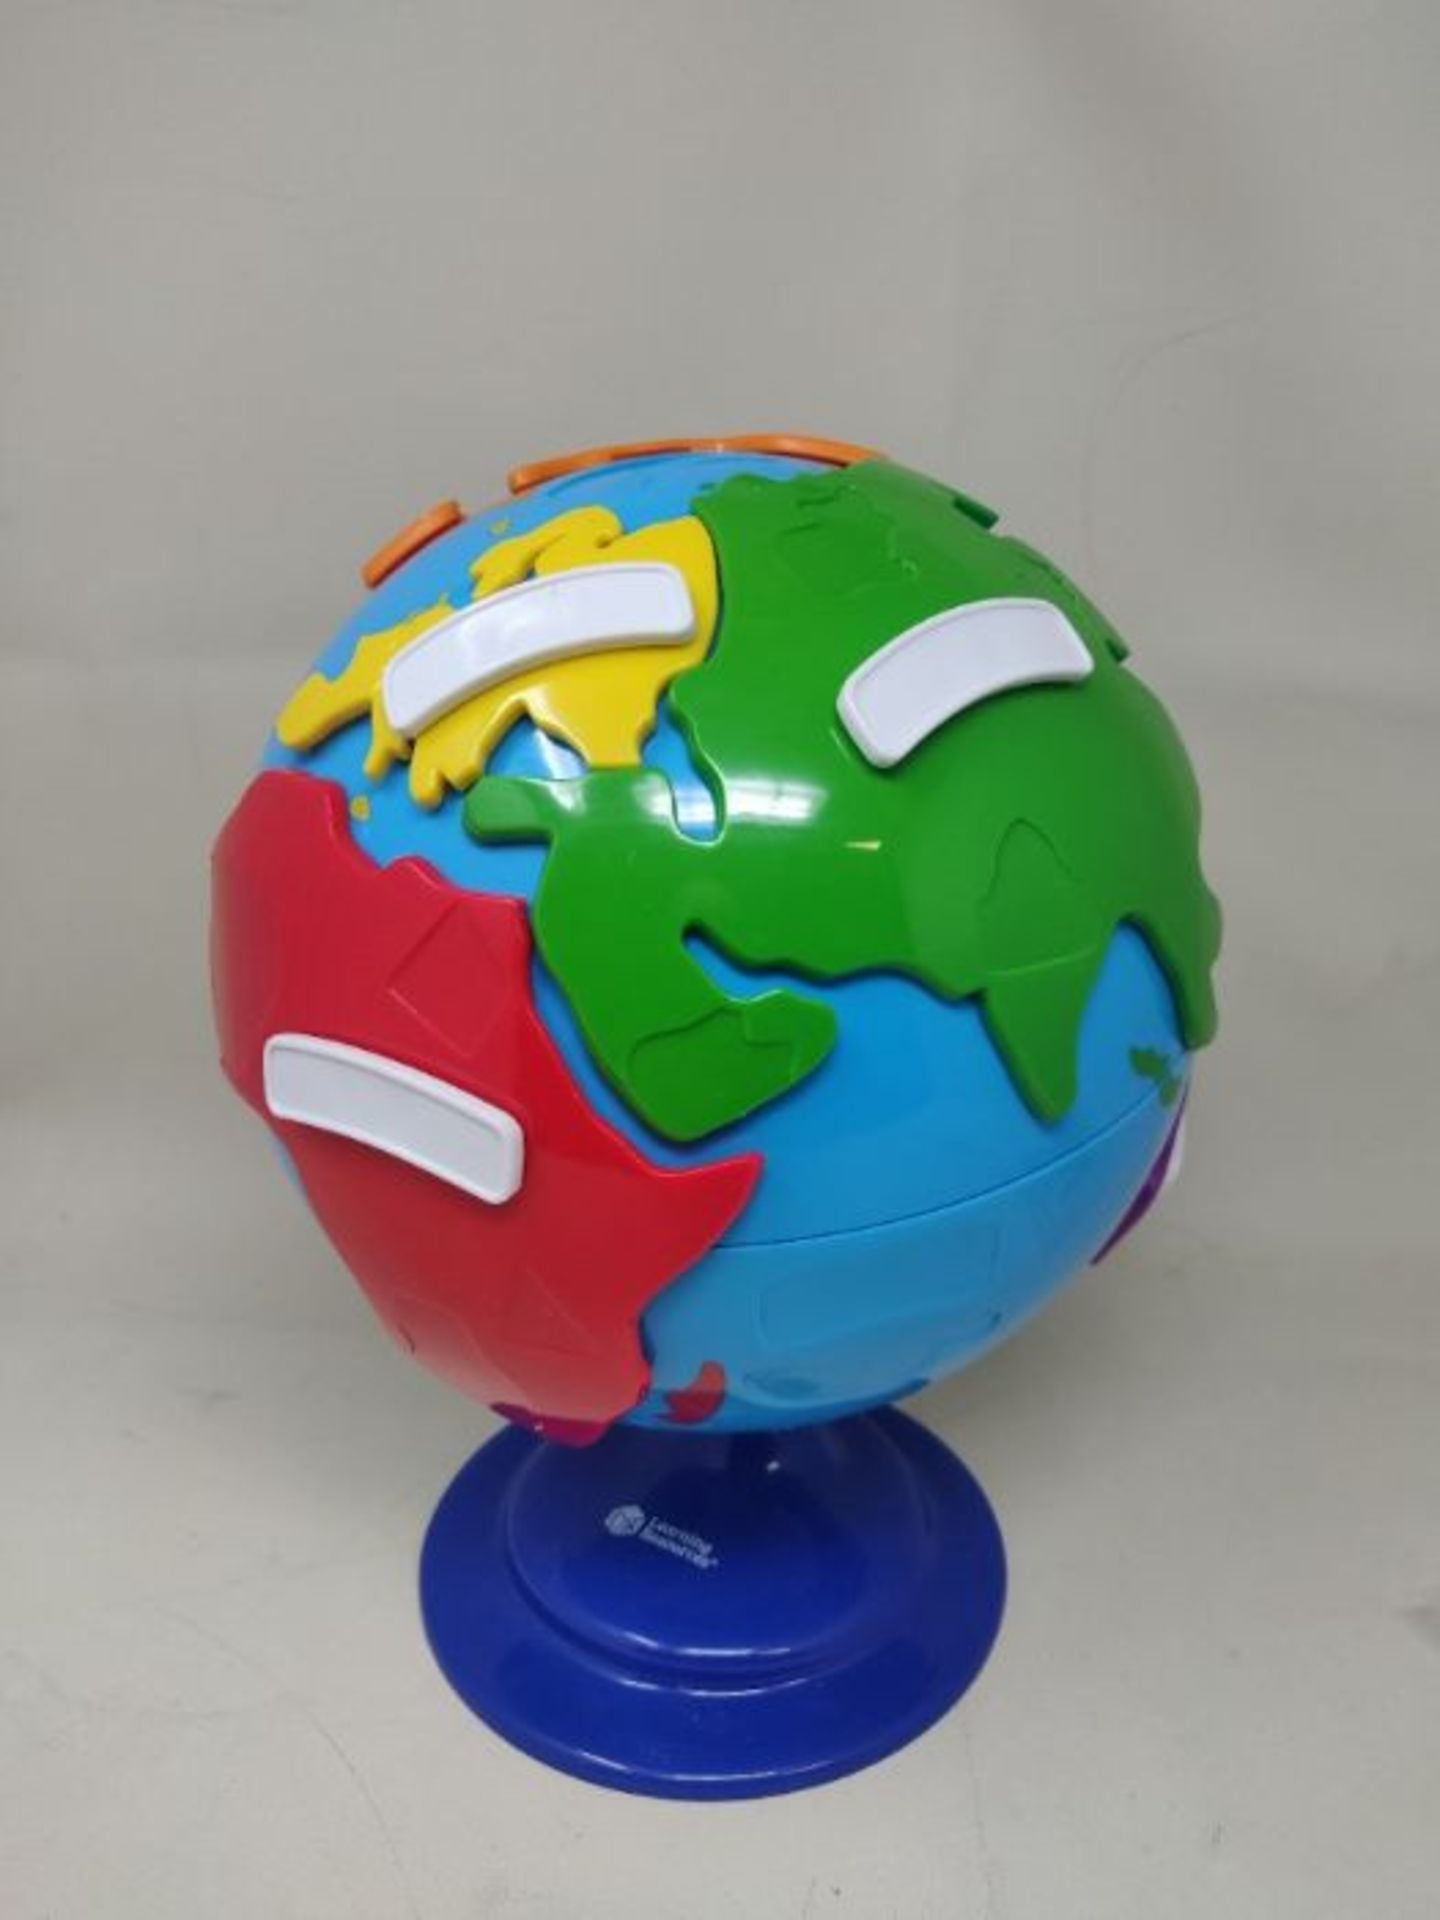 Learning Resources Puzzle Globe - Image 3 of 3